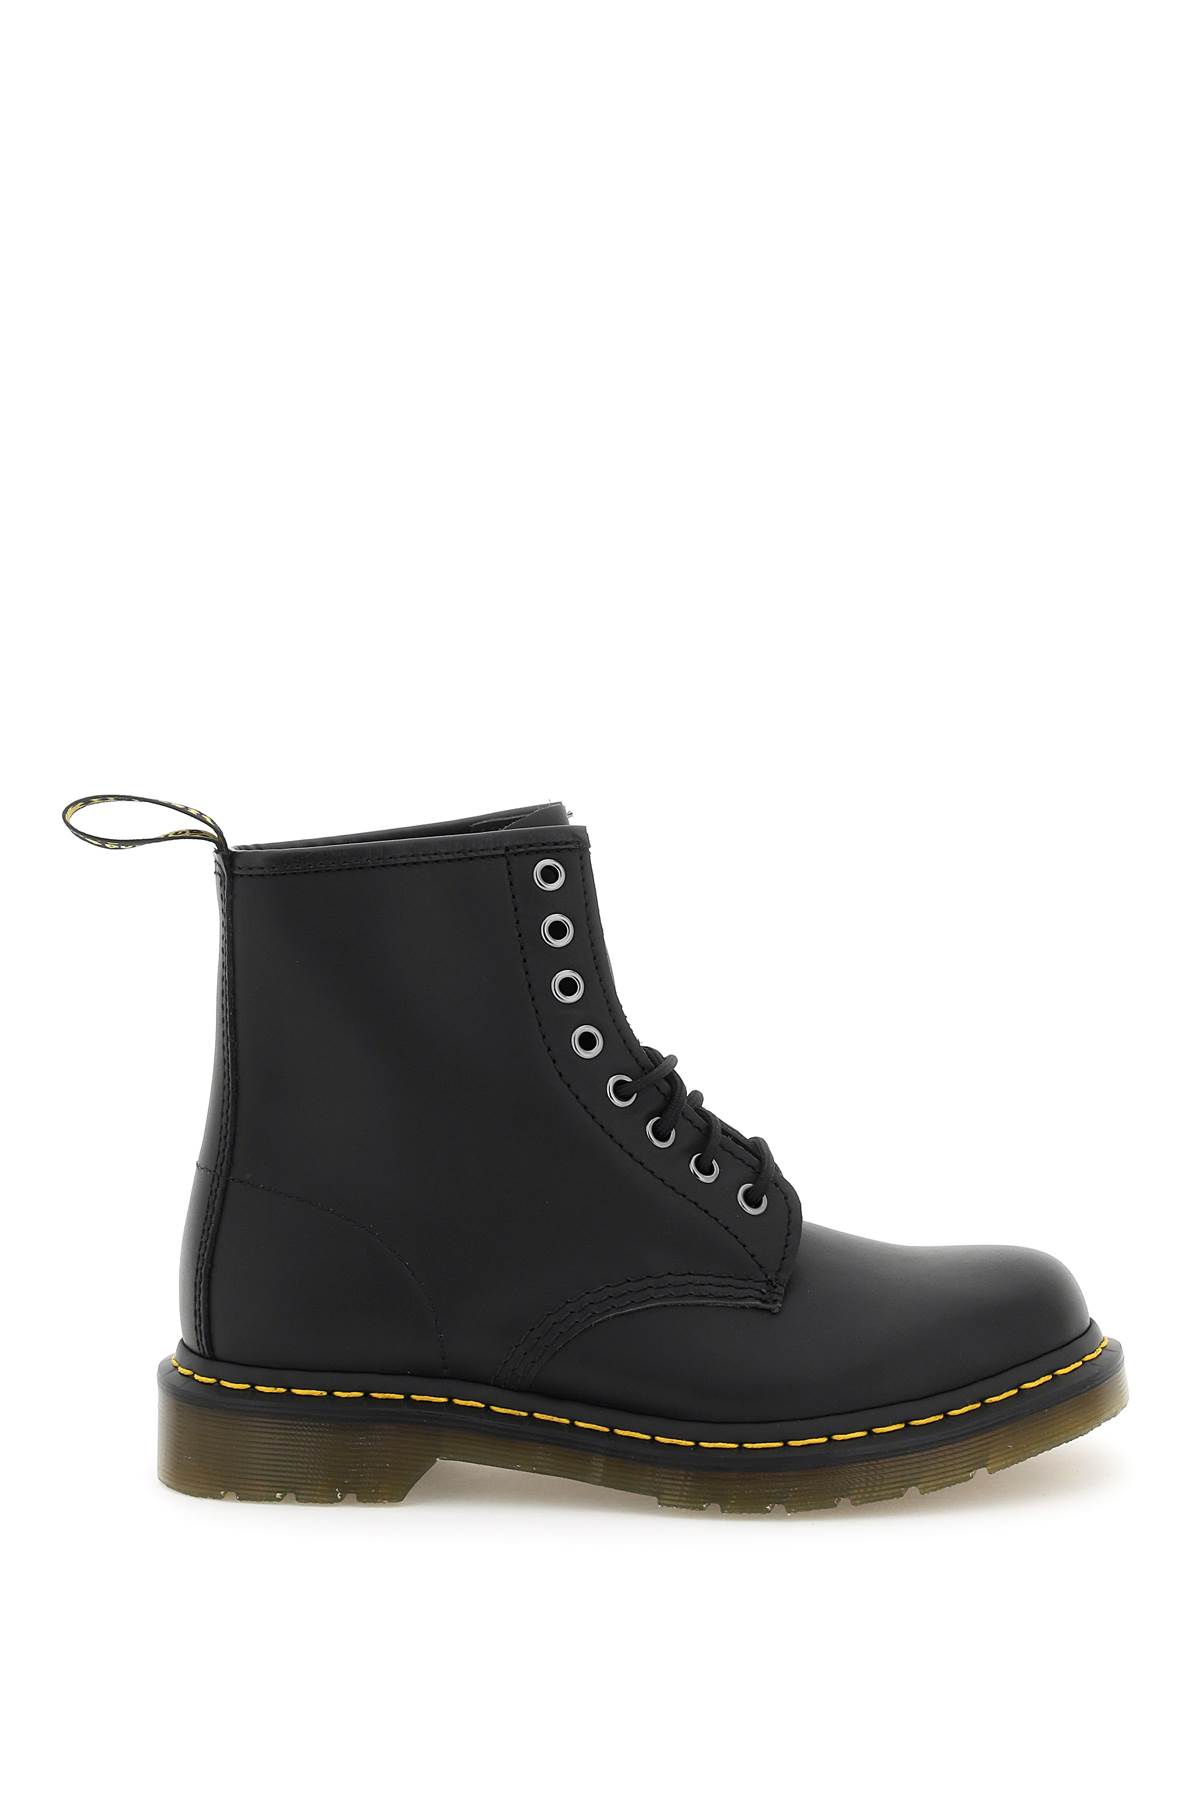 Dr. Martens 1460 Nappa Lace-up Combat Boots